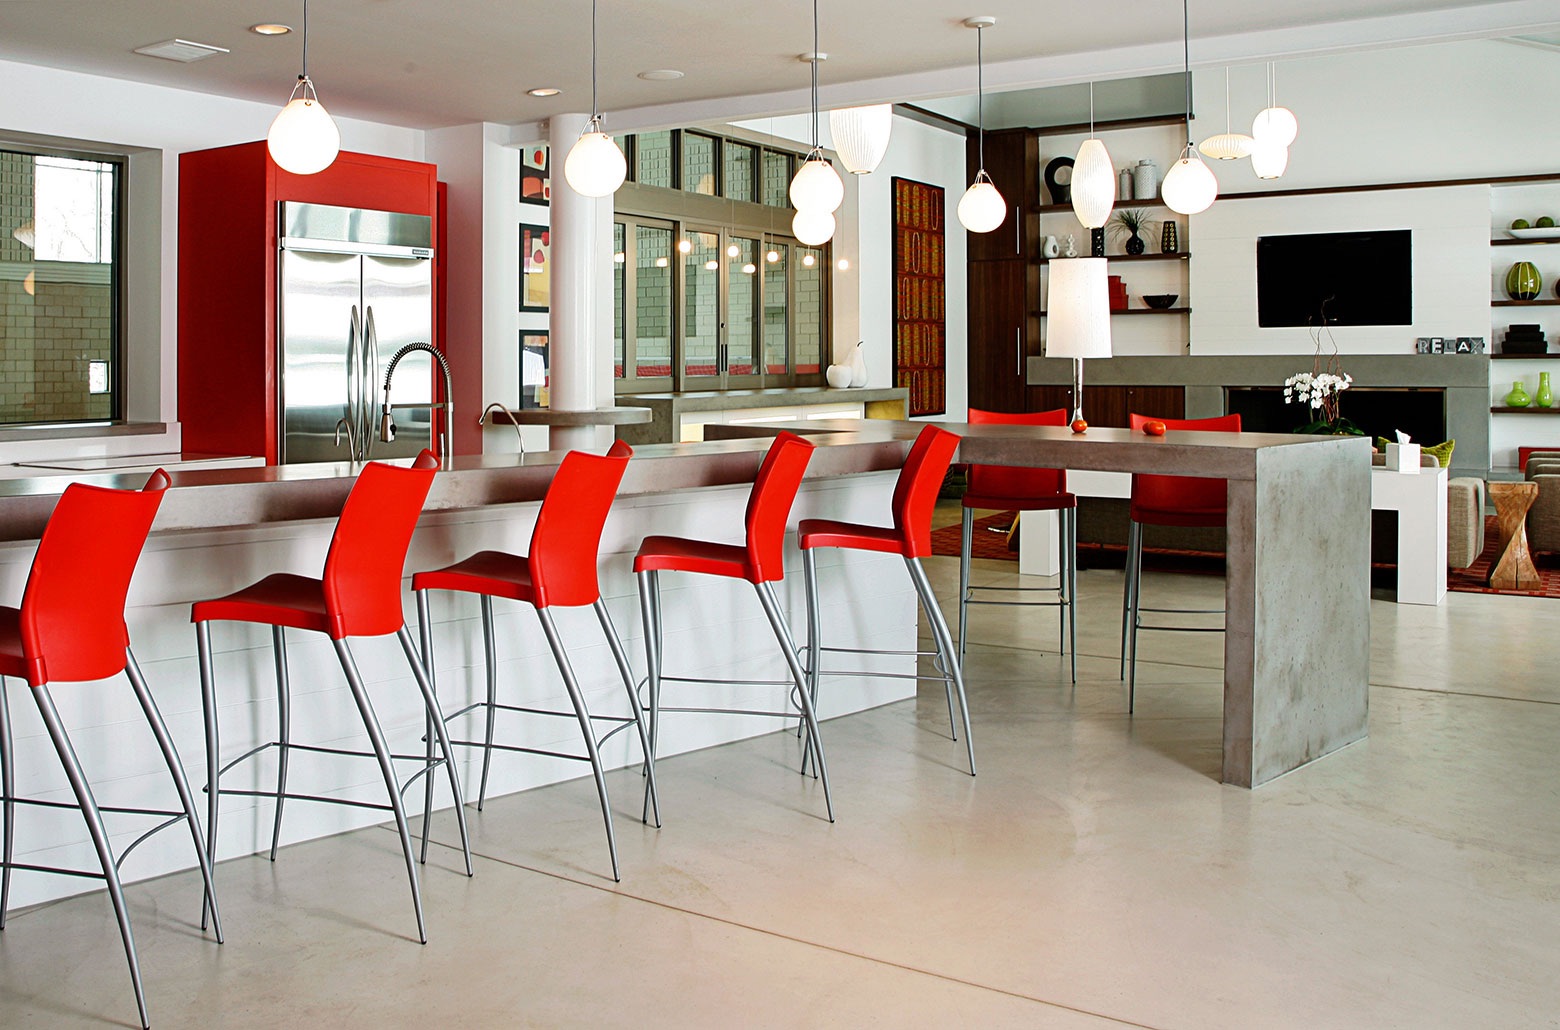 red chairs in kitchen